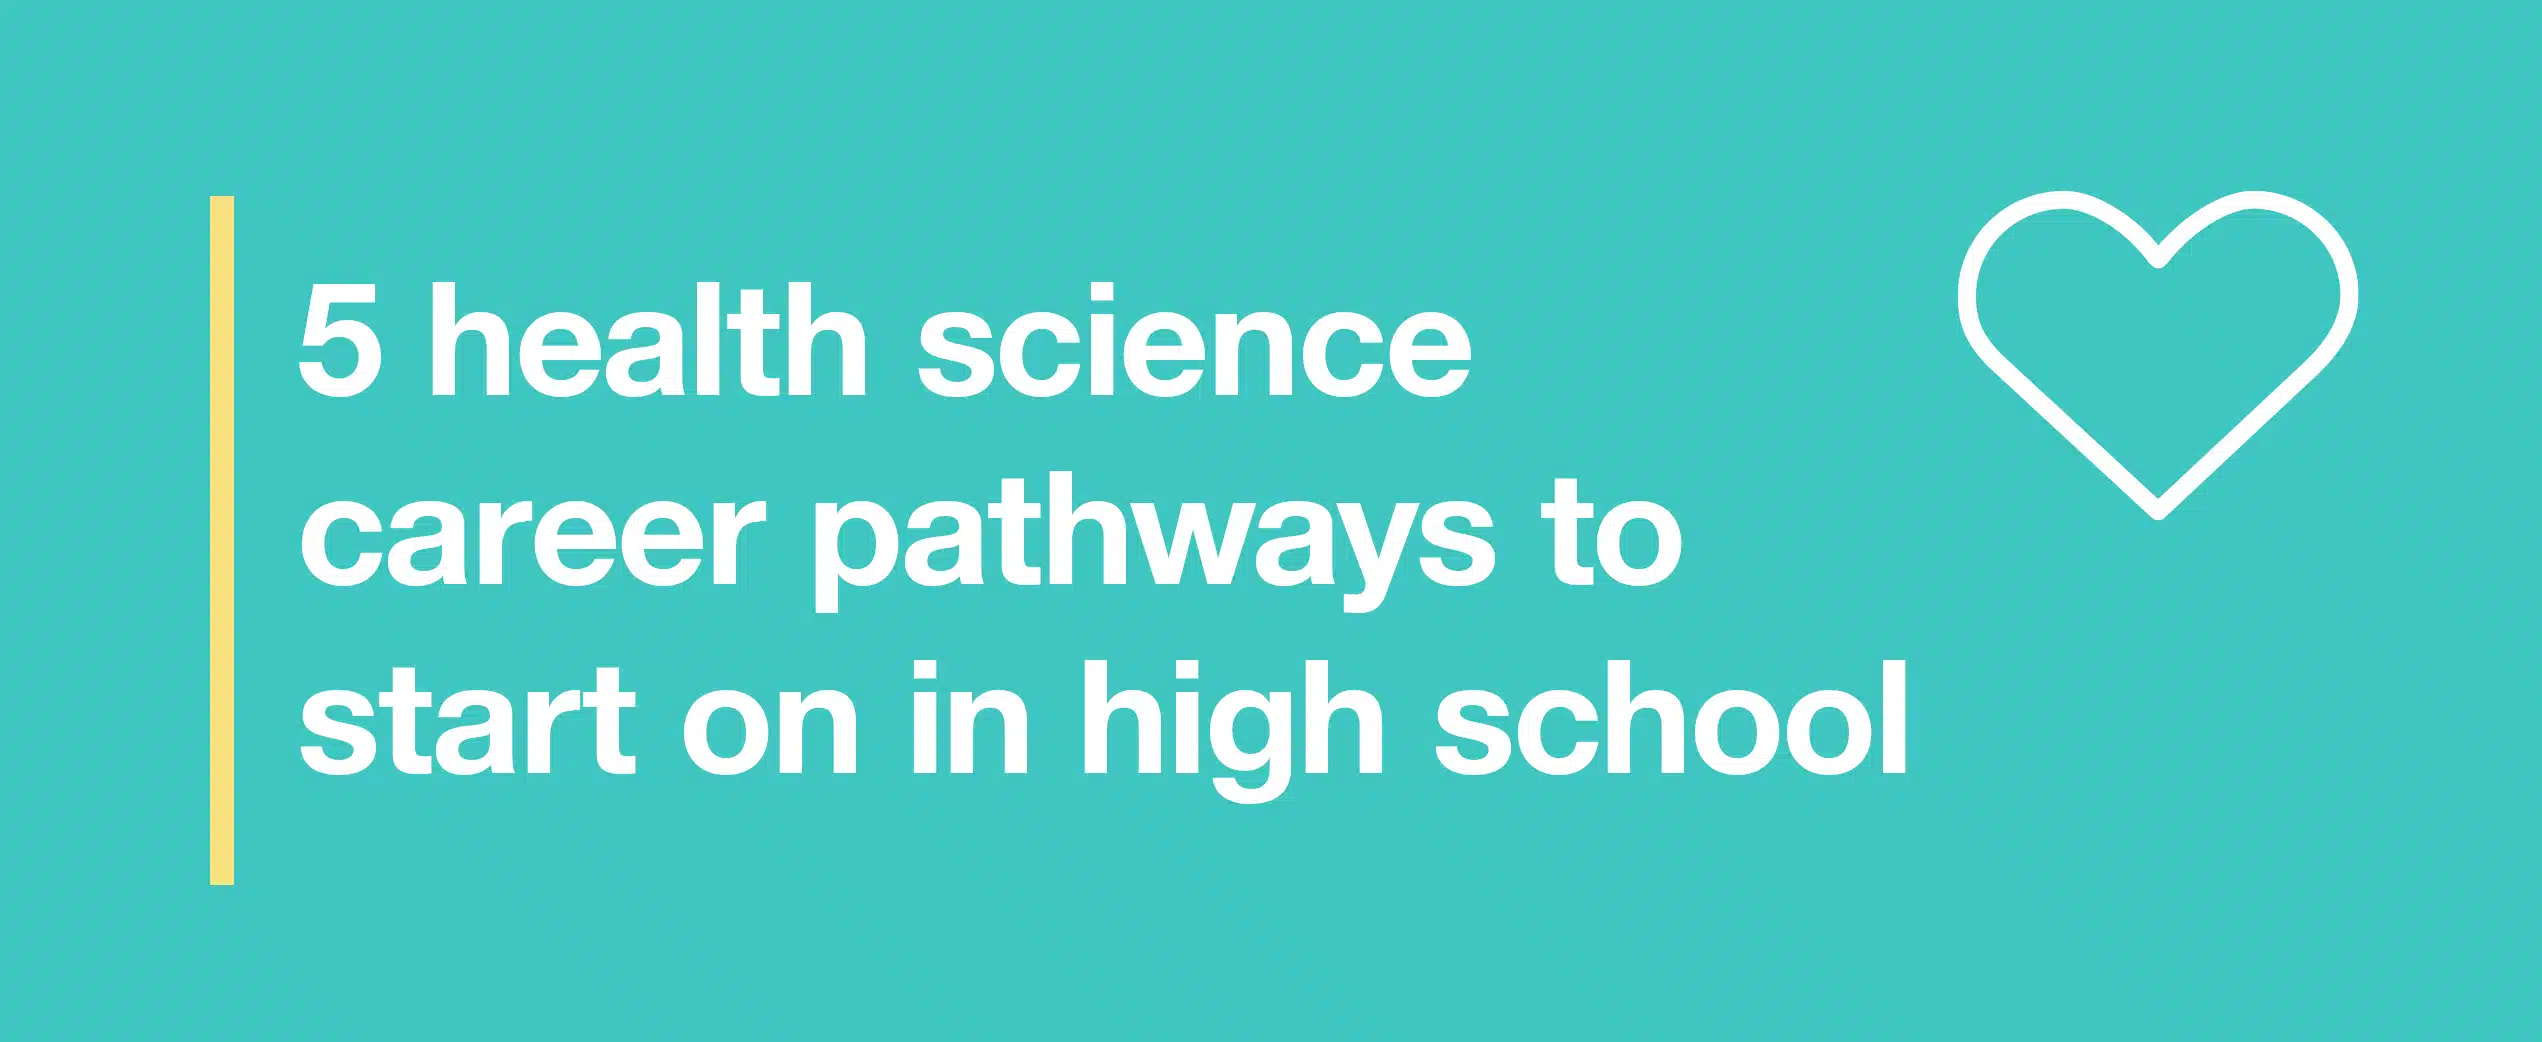 5 health science career pathways to start on in high school copy on image